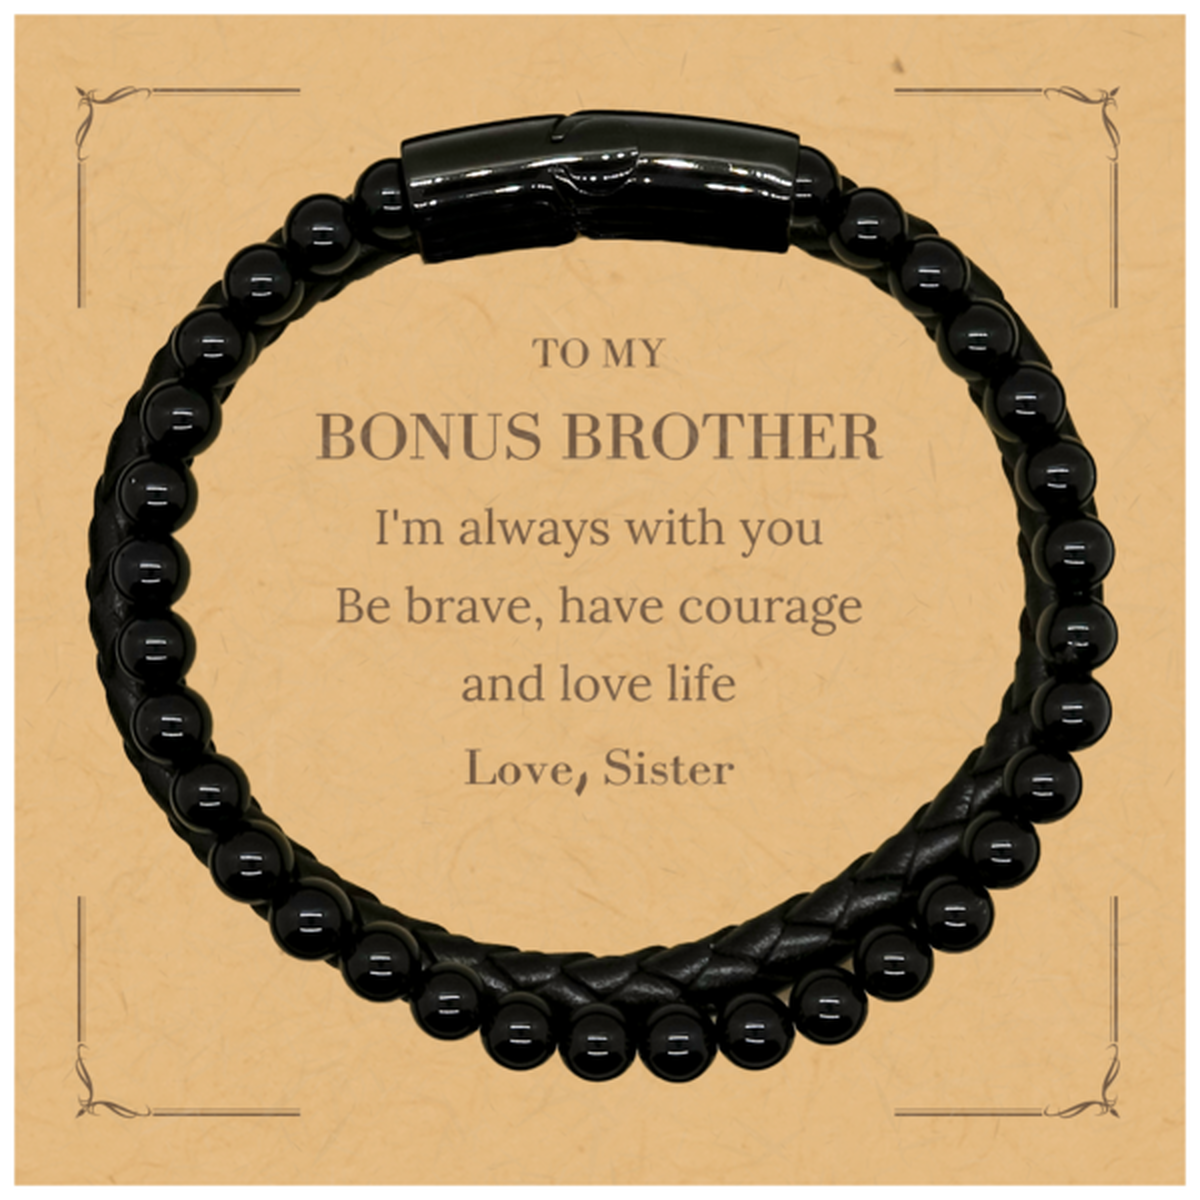 To My Bonus Brother Gifts from Sister, Unique Stone Leather Bracelets Inspirational Christmas Birthday Graduation Gifts for Bonus Brother I'm always with you. Be brave, have courage and love life. Love, Sister